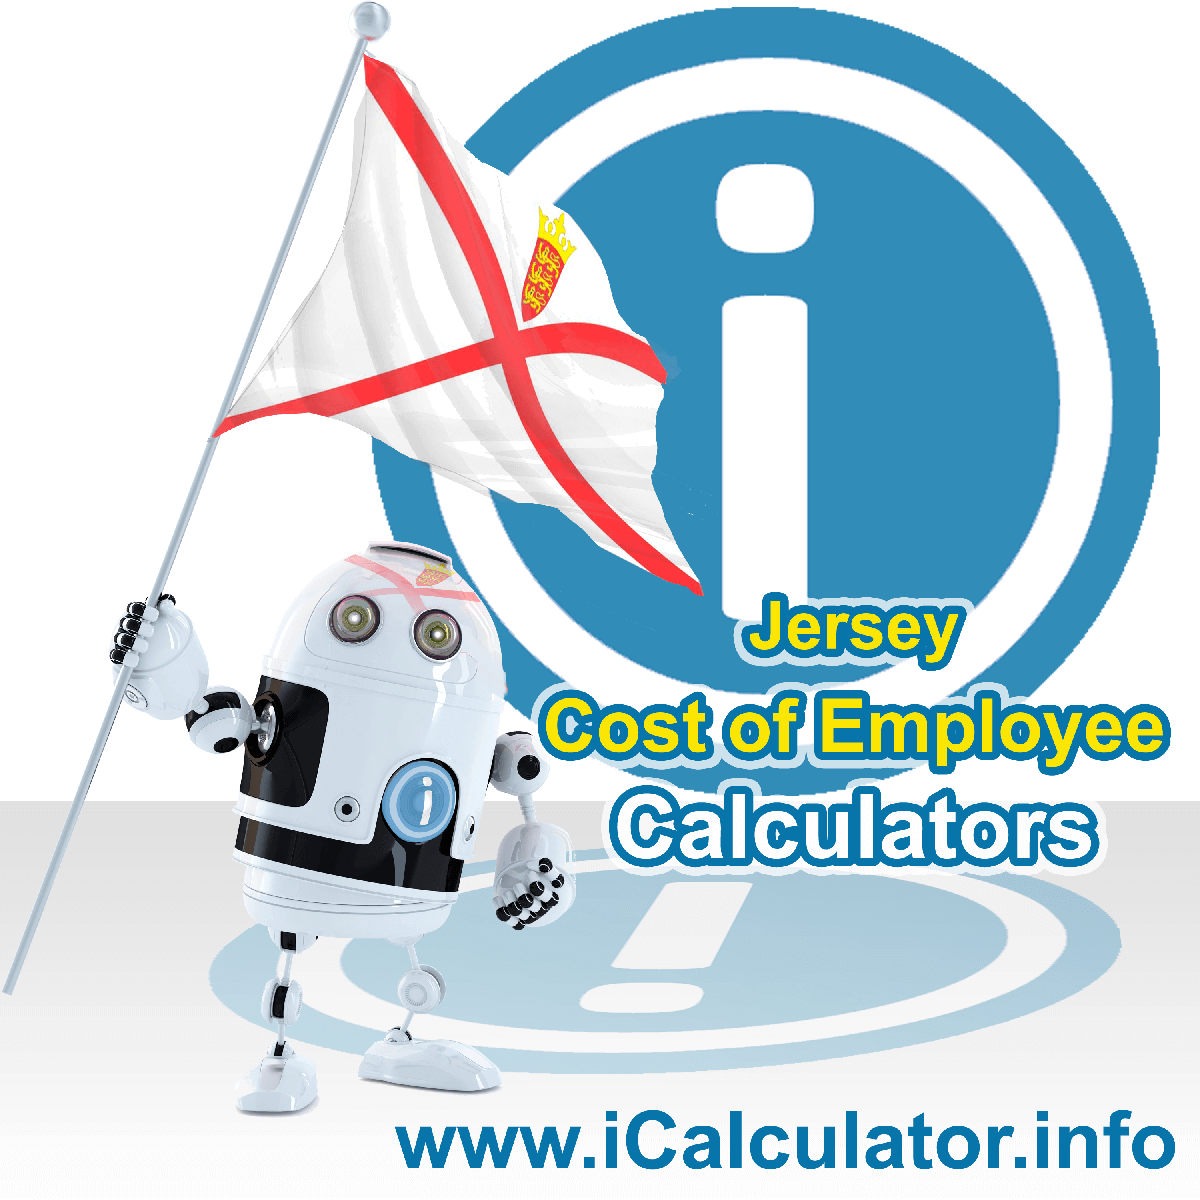 Jersey Payroll Calculator. This image shows a new employer in Jersey looking at payroll and human resource services in Jersey as they want to hire an employee in Jersey but are not sure of the employment costs. So, they make use of the Jersey payroll calculator to understand their employment cost in Jersey in 2023